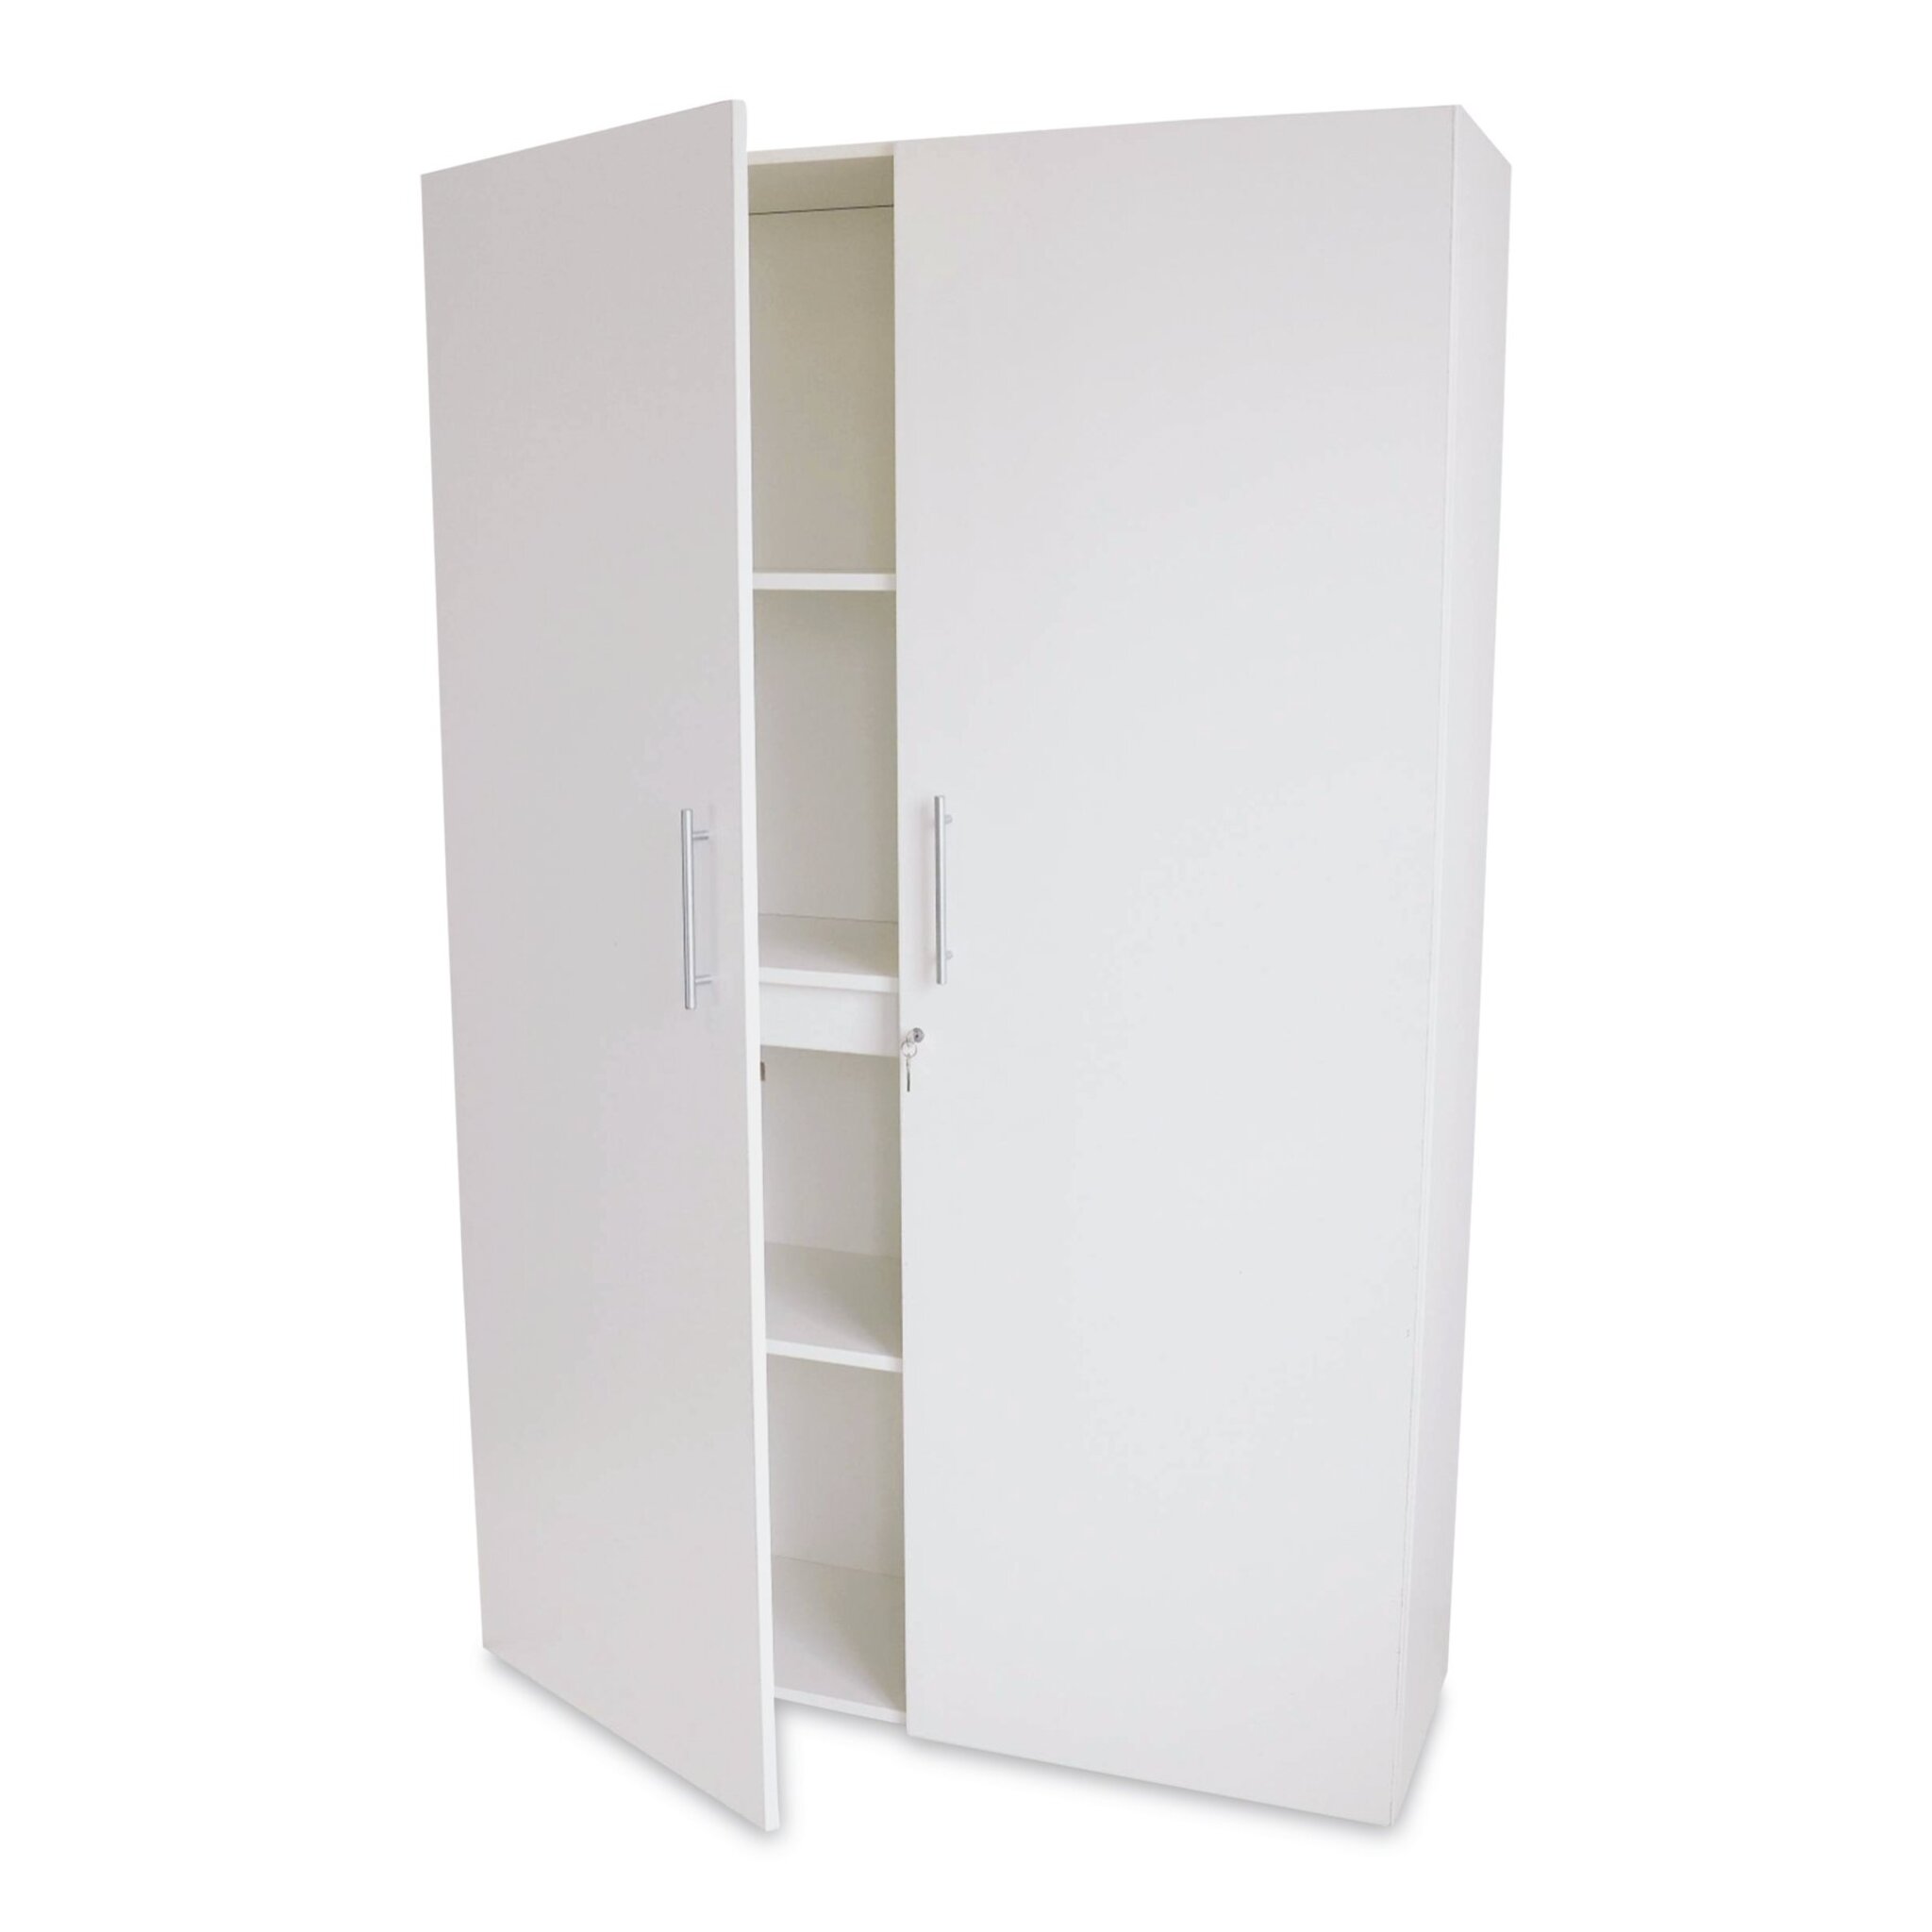 White Wall Collection 12 Cubby Backpack Storage Cabinet - NextGen